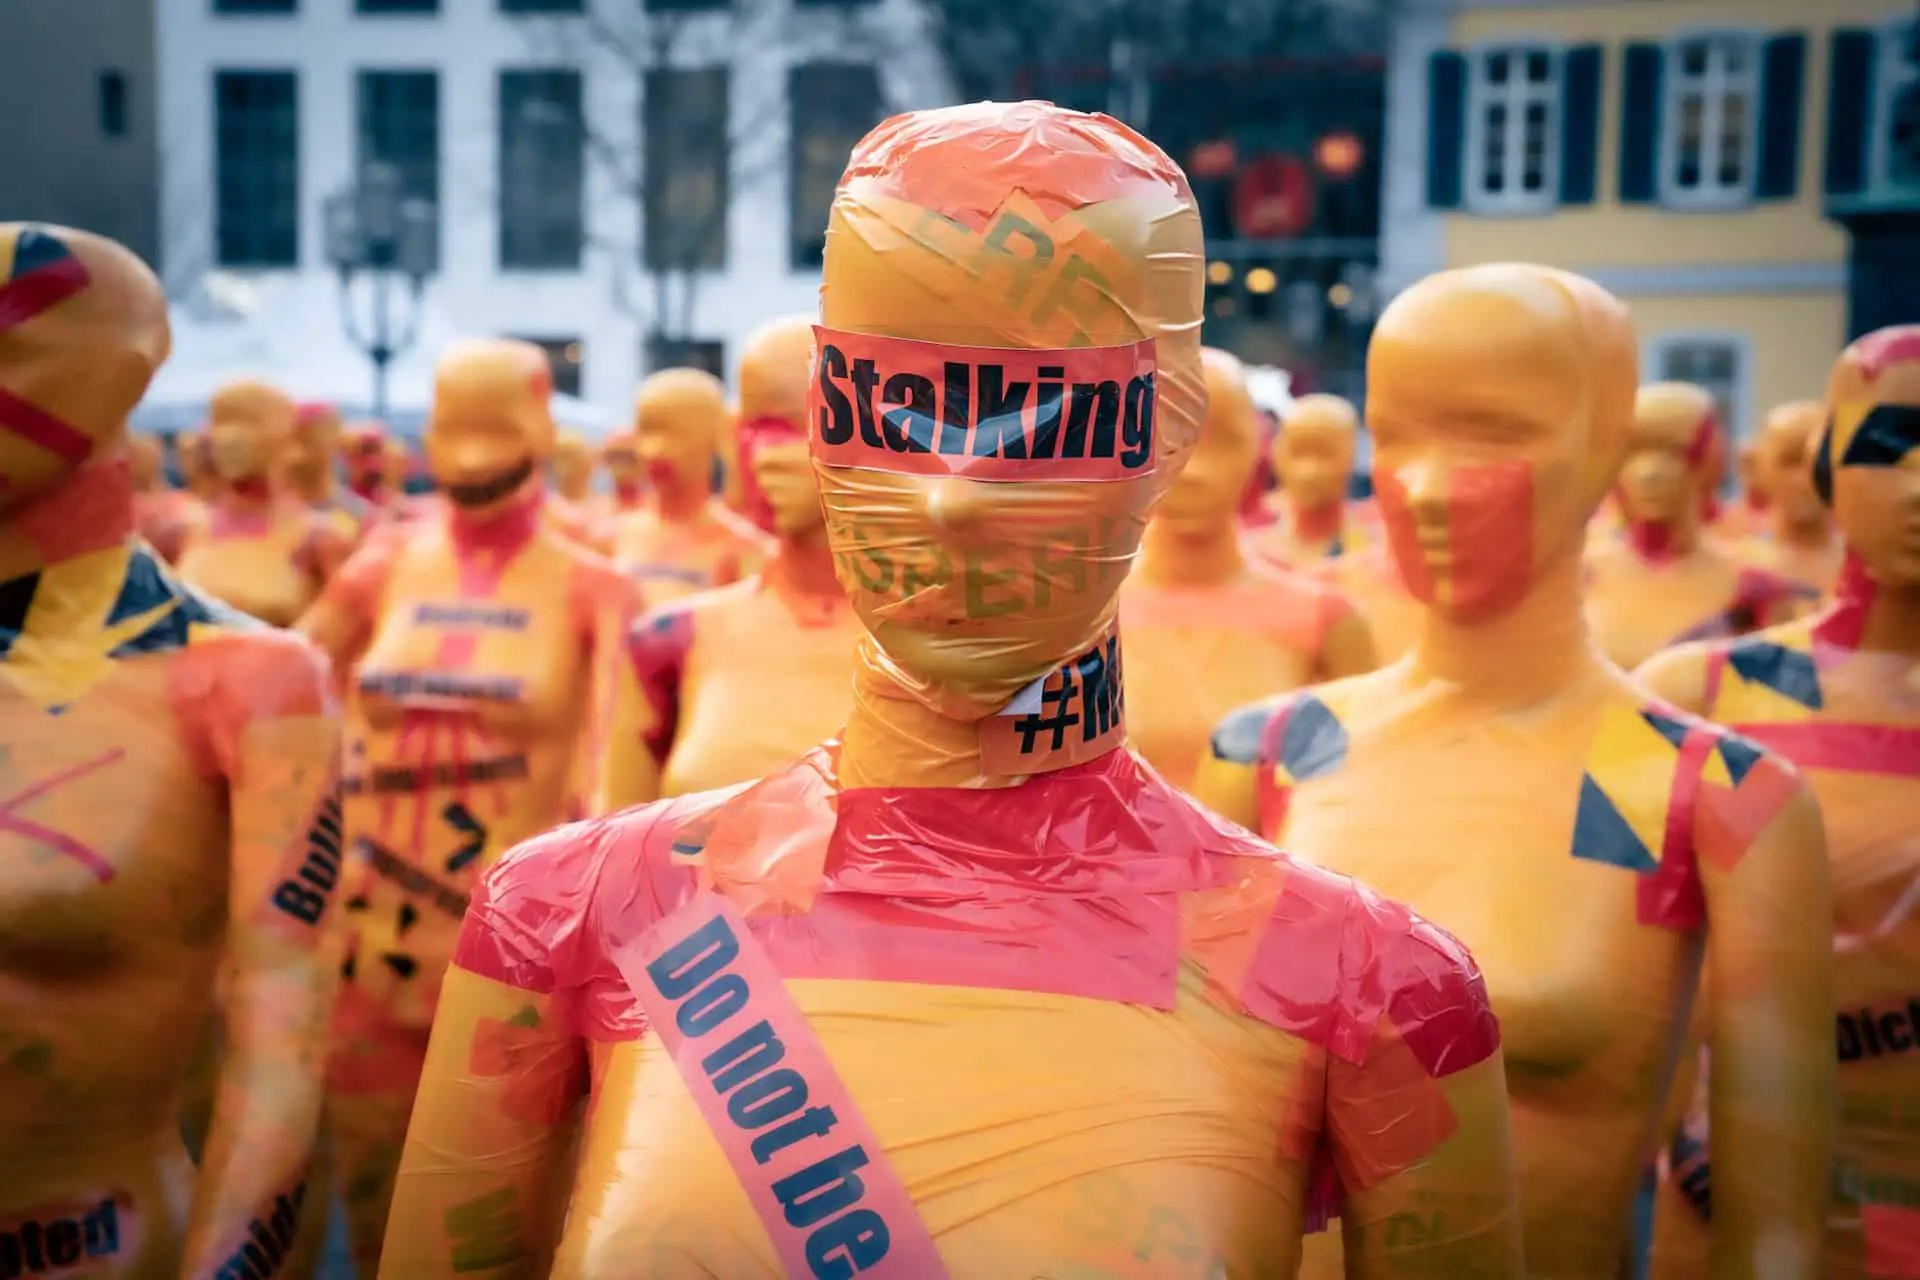 Mannequins covered in tape with stalking and do not touch written on it